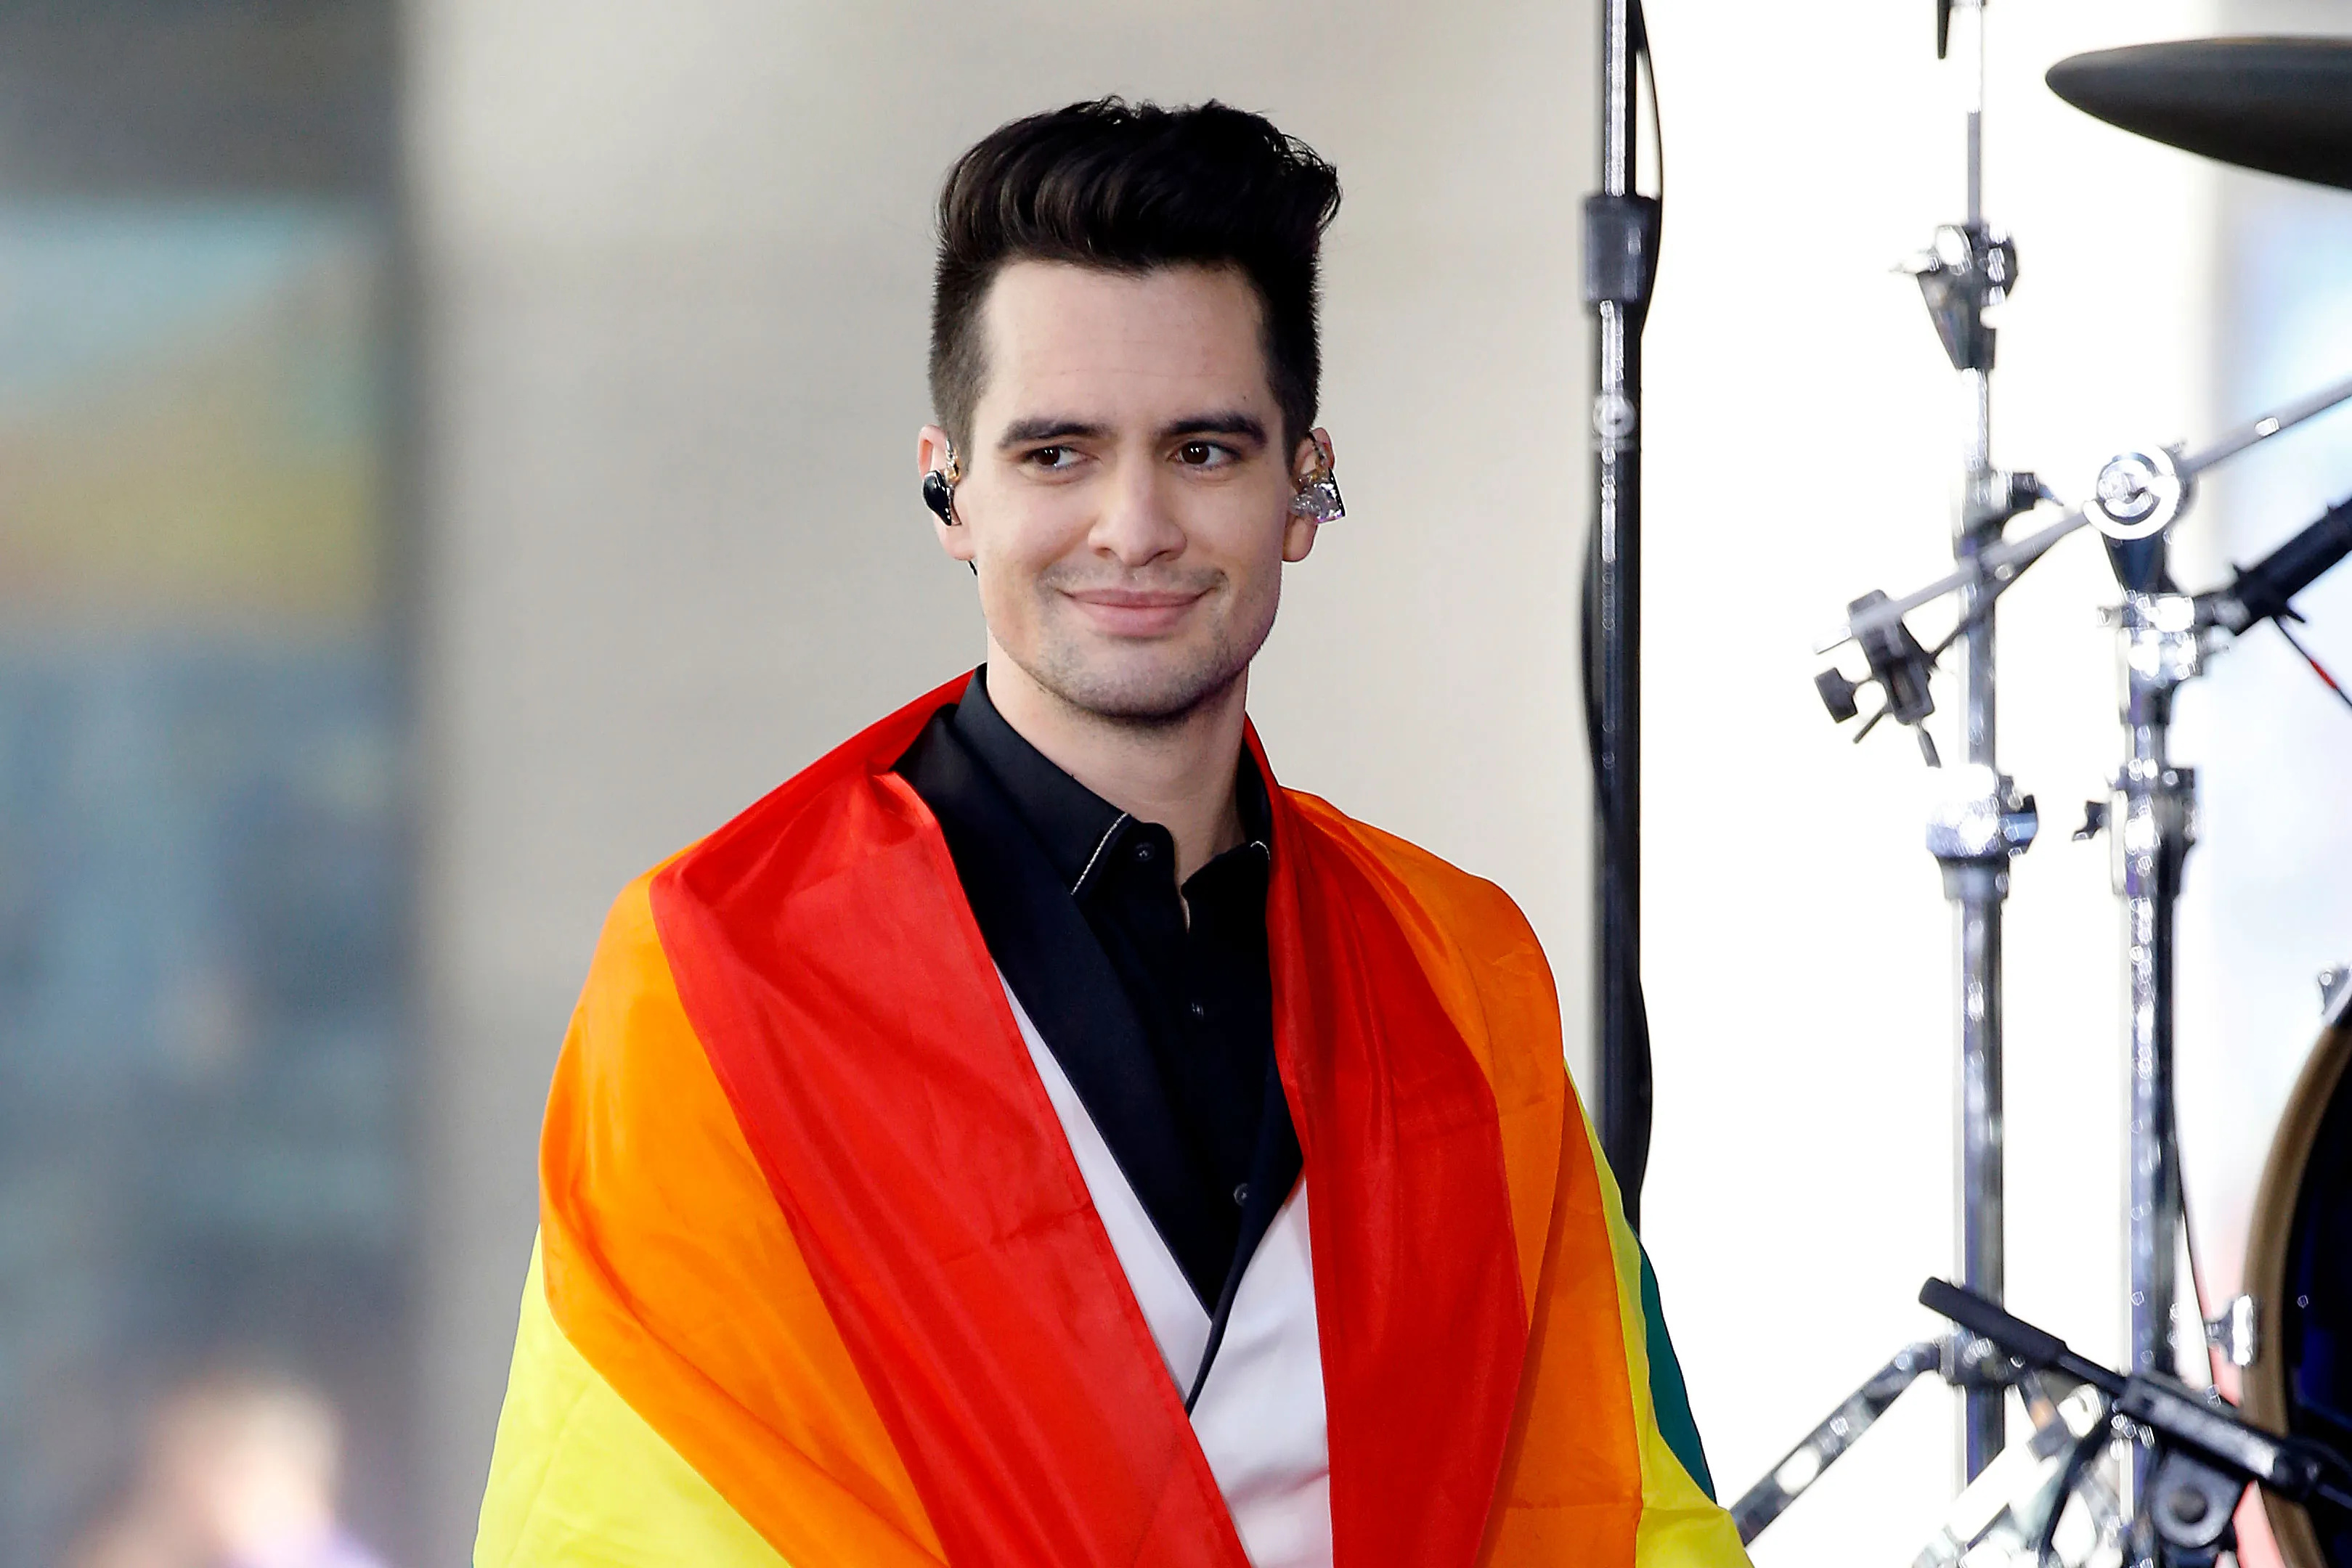 Brendon Urie: Former lead vocalist and frontman of Panic! at the Disco. 3240x2160 HD Background.